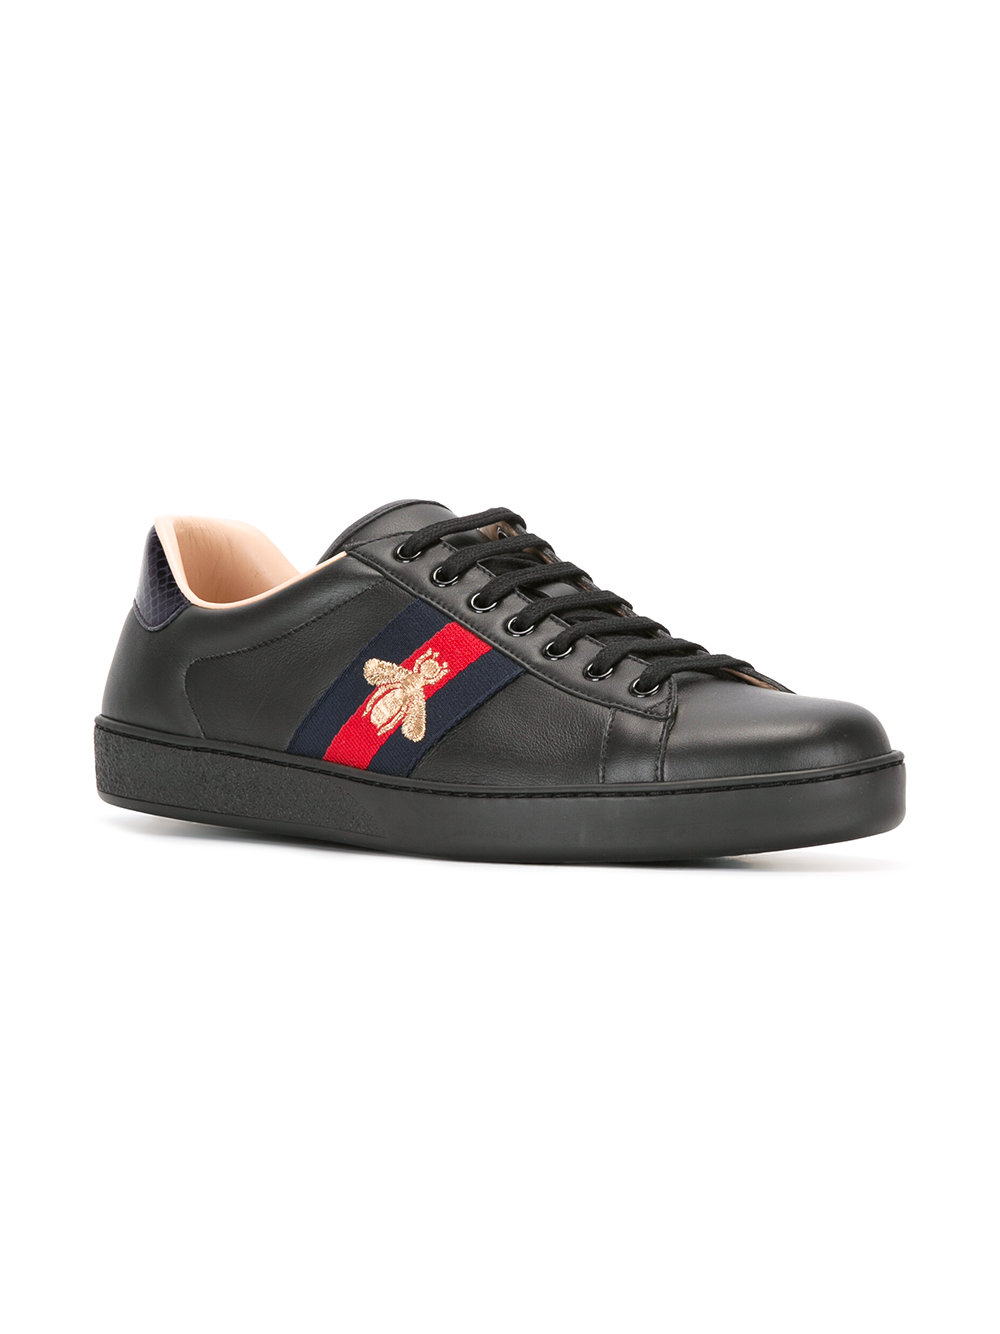 Gucci Bee Sneaker Men - Welcome To Our Online Shop In Pakistan